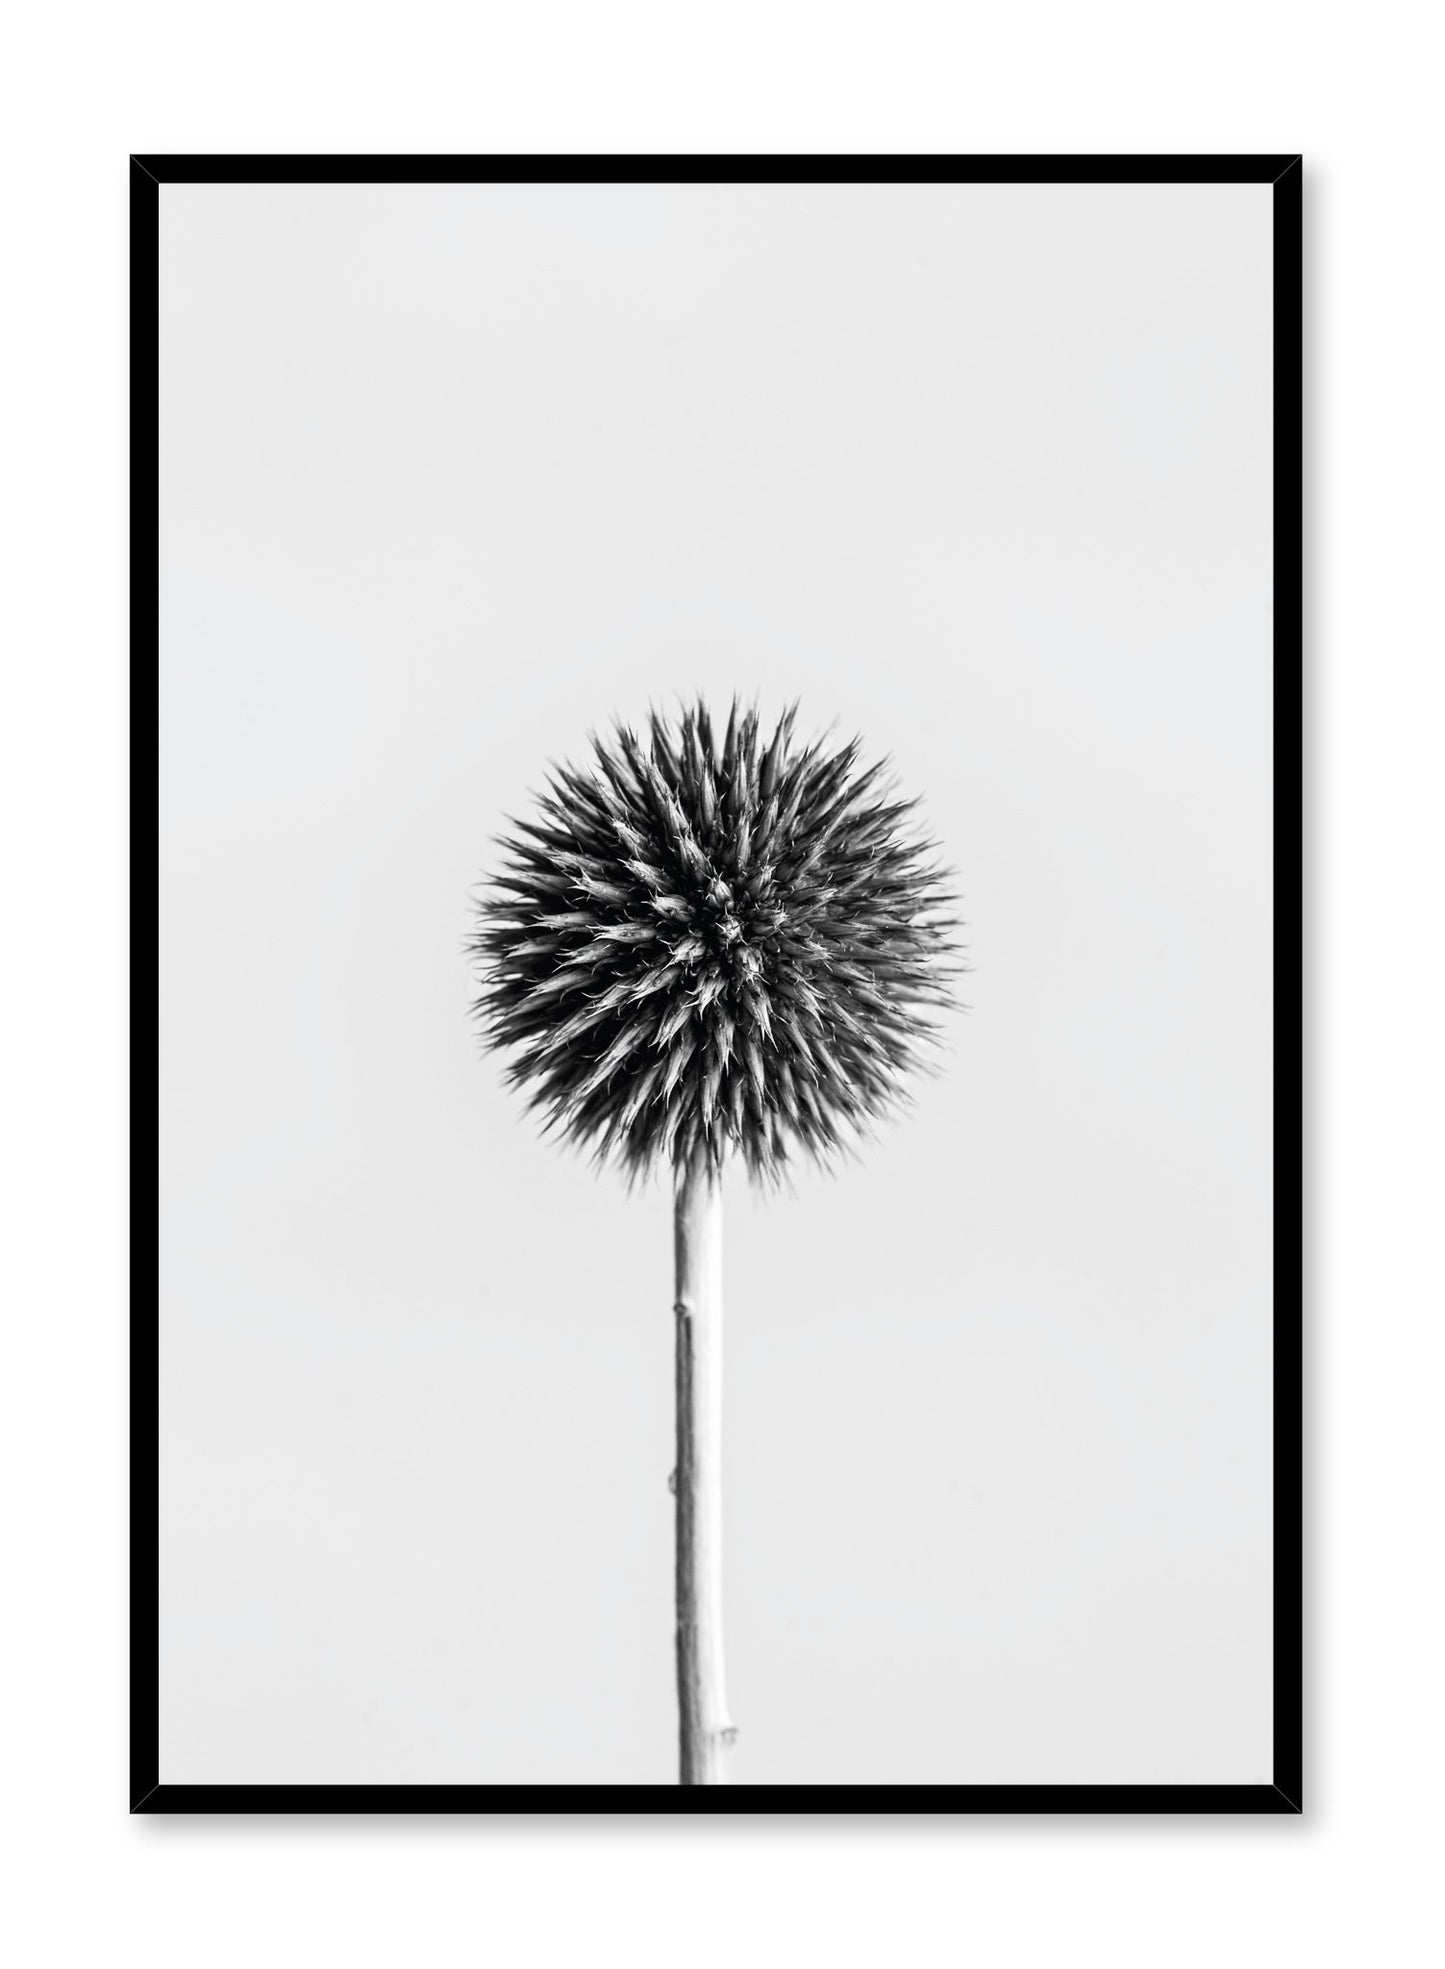 Scandinavian poster by Opposite Wall with Silver Thistle black and white art photo